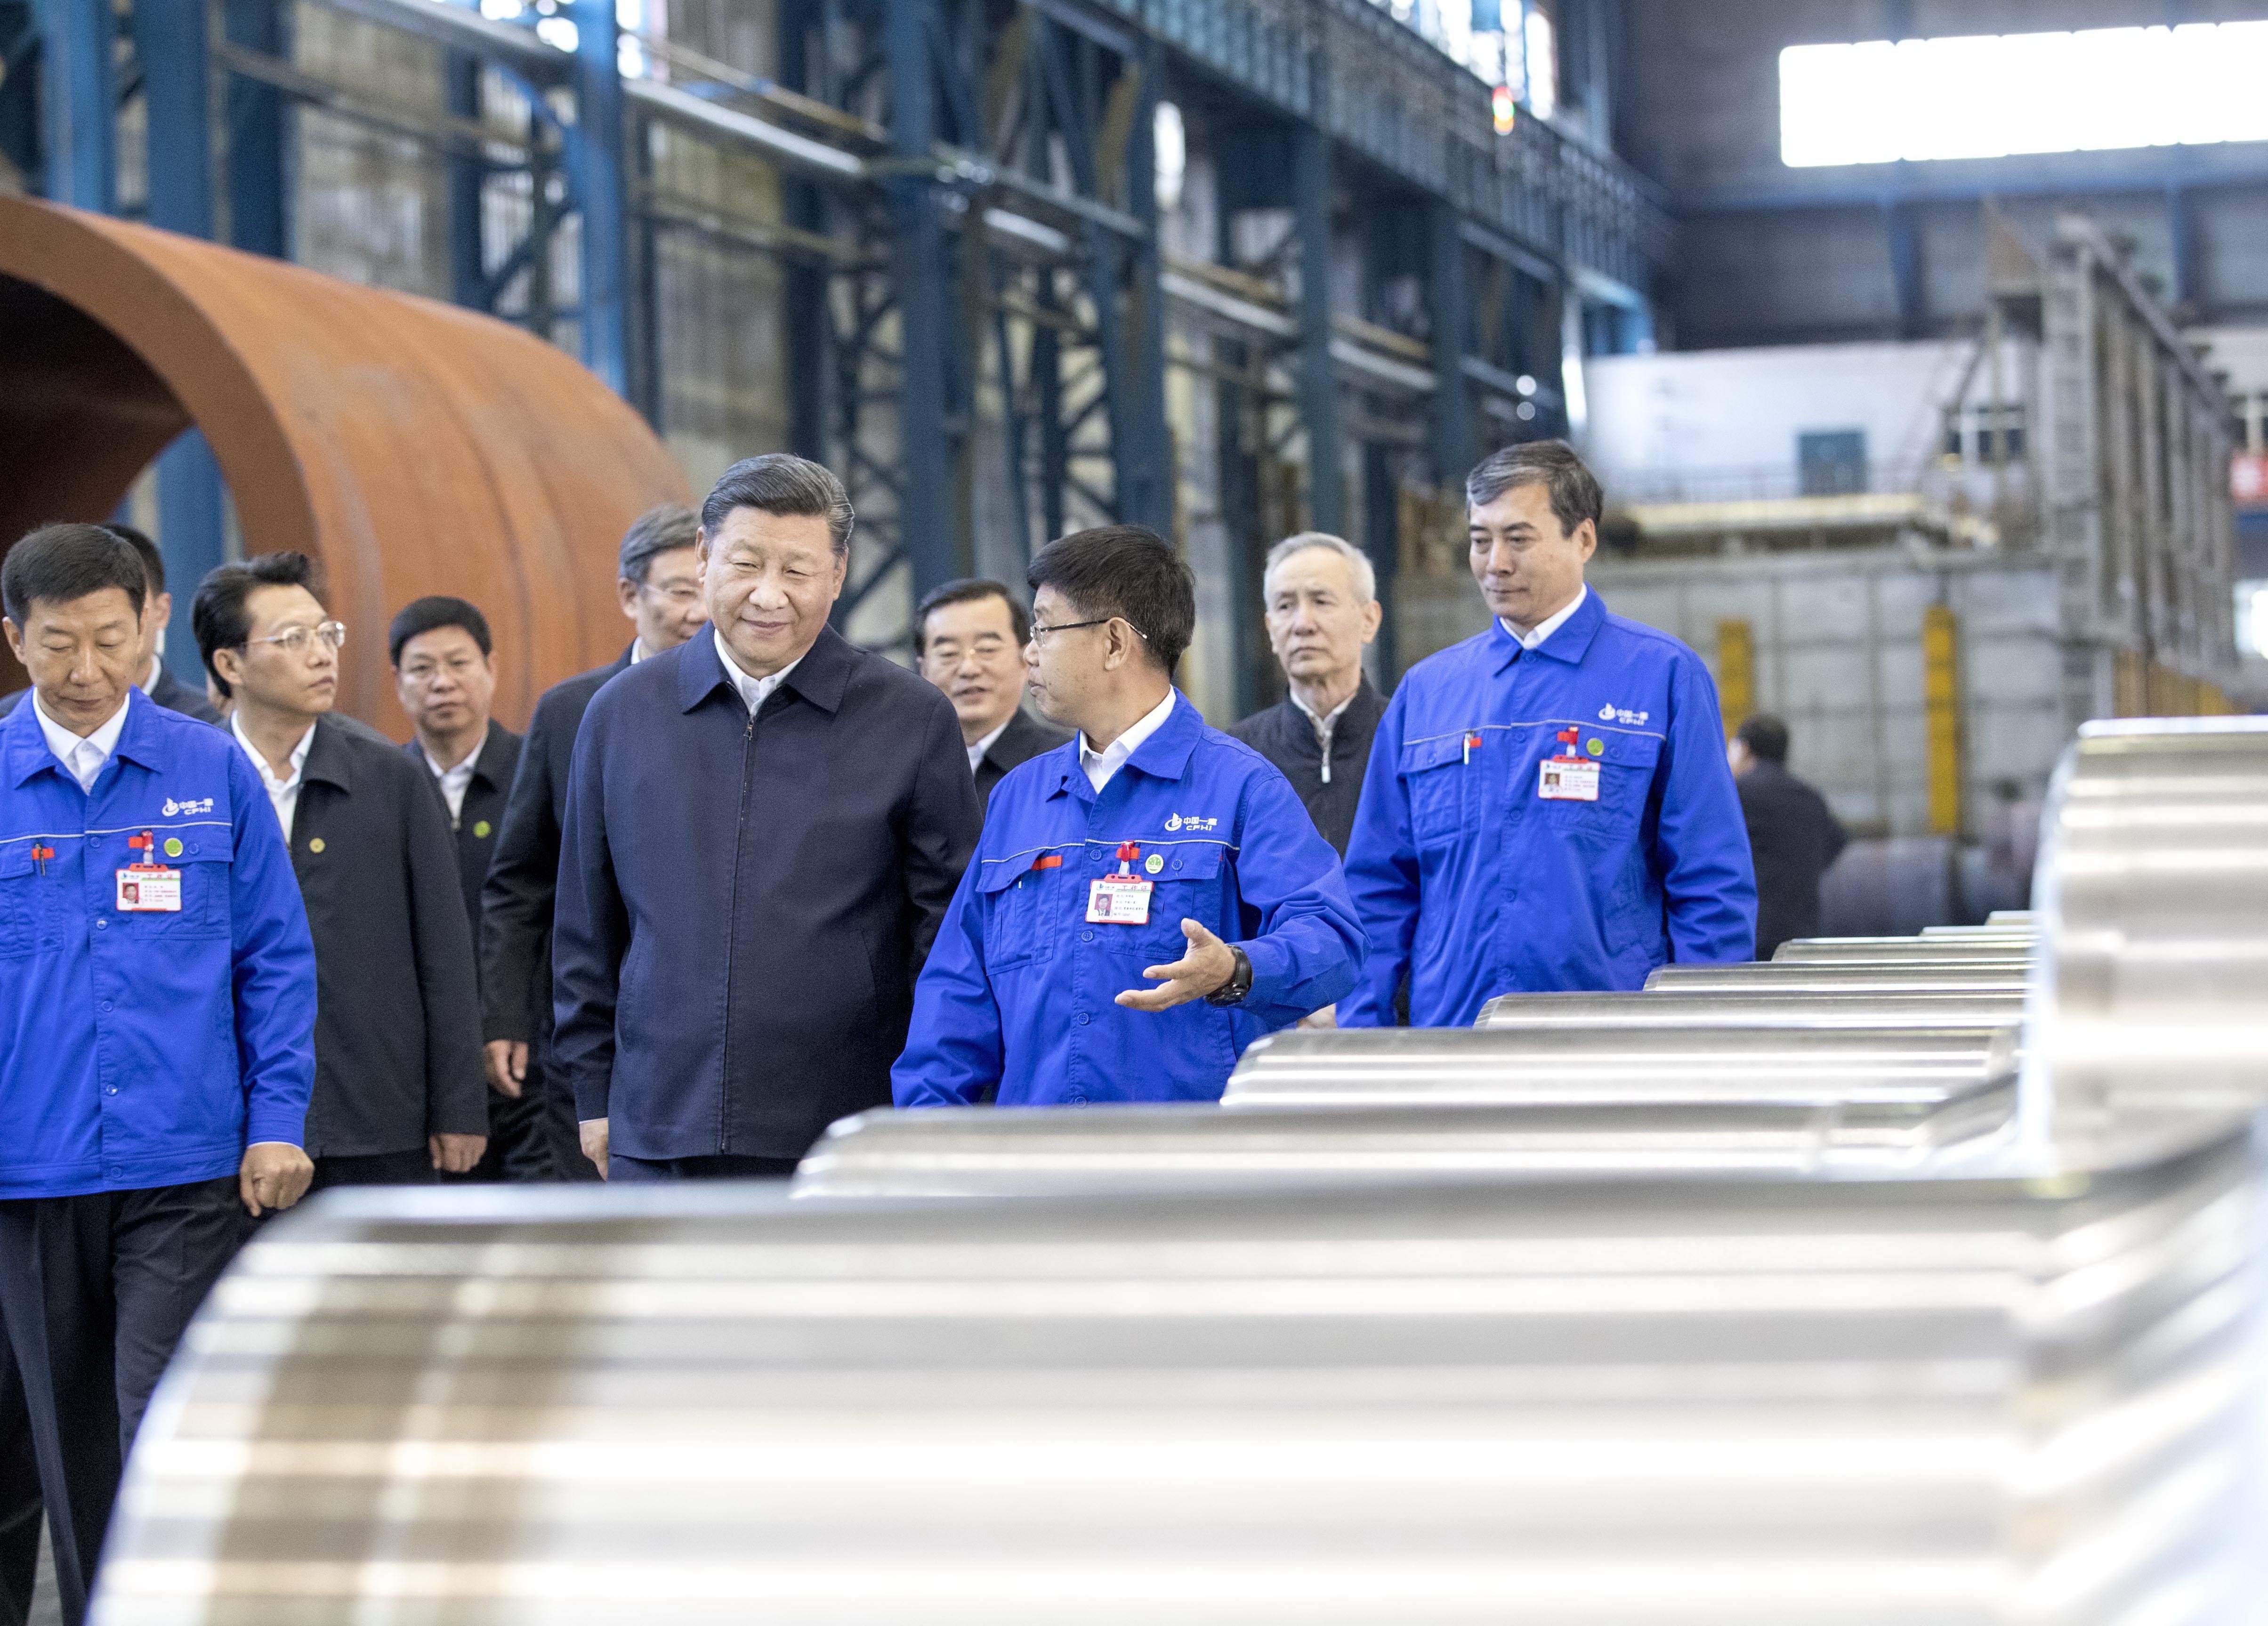 President Xi Jinping visits a workshop of China First Heavy Industries in Qiqihar, Heilongjiang province. Is the Chinese economy overleveraged? A large part of China’s high credit-to-GDP ratio is actually “credit” extended to state-owned enterprises. Such “credit” should be reclassified as Beijing’s fiscal outlays. Photo: Xinhua